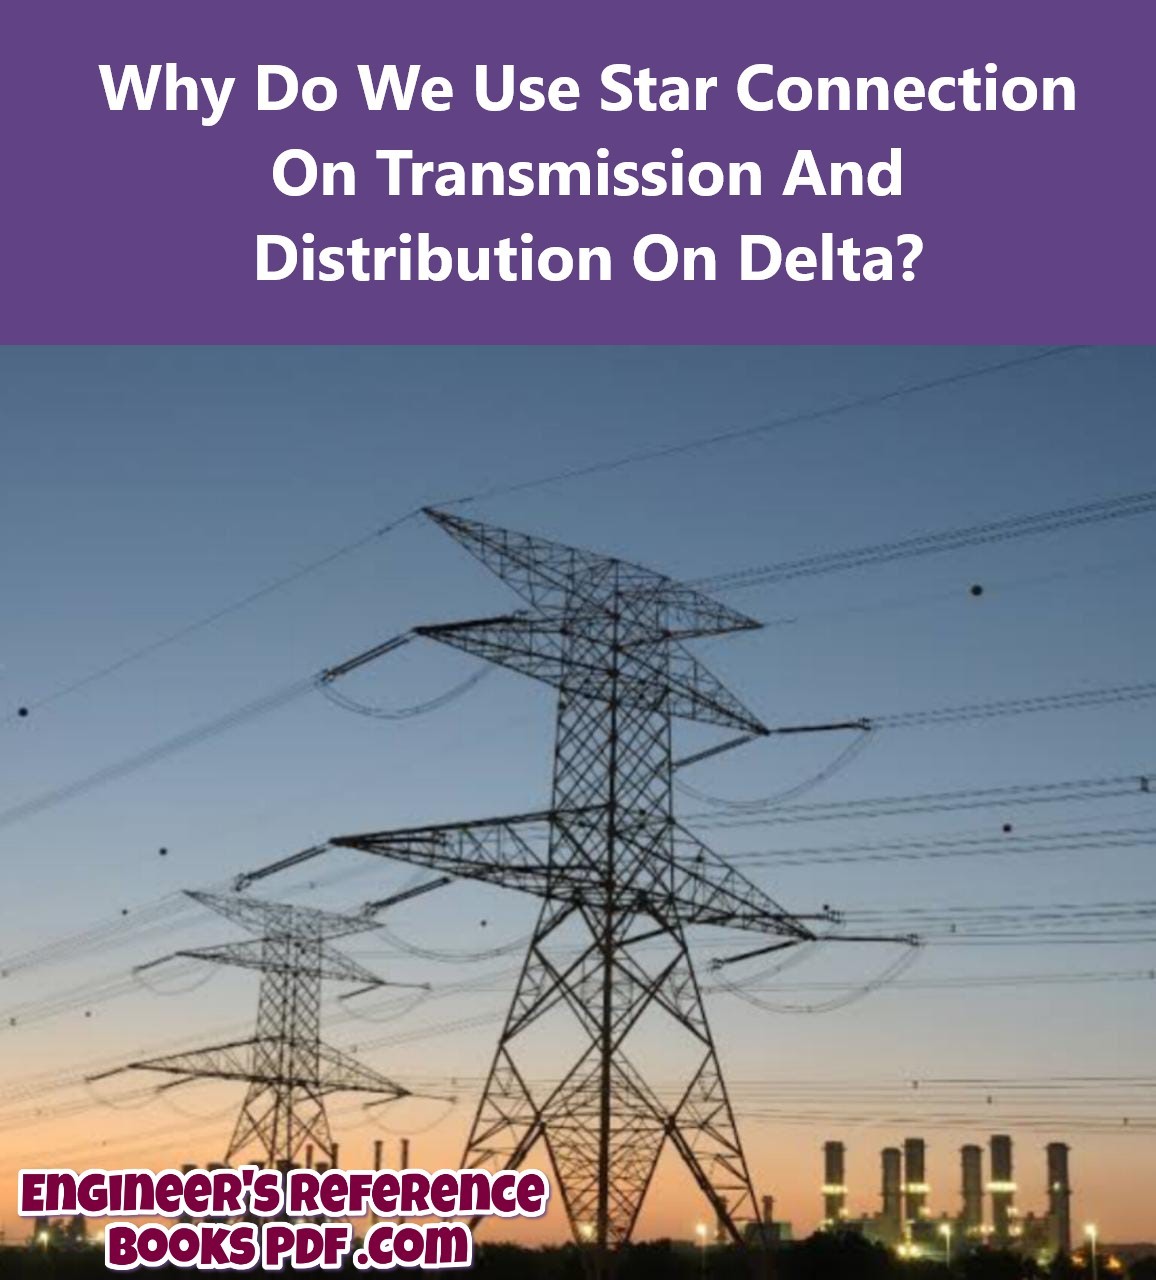 Why Do We Use Star Connection On Transmission And Distribution On Delta?
